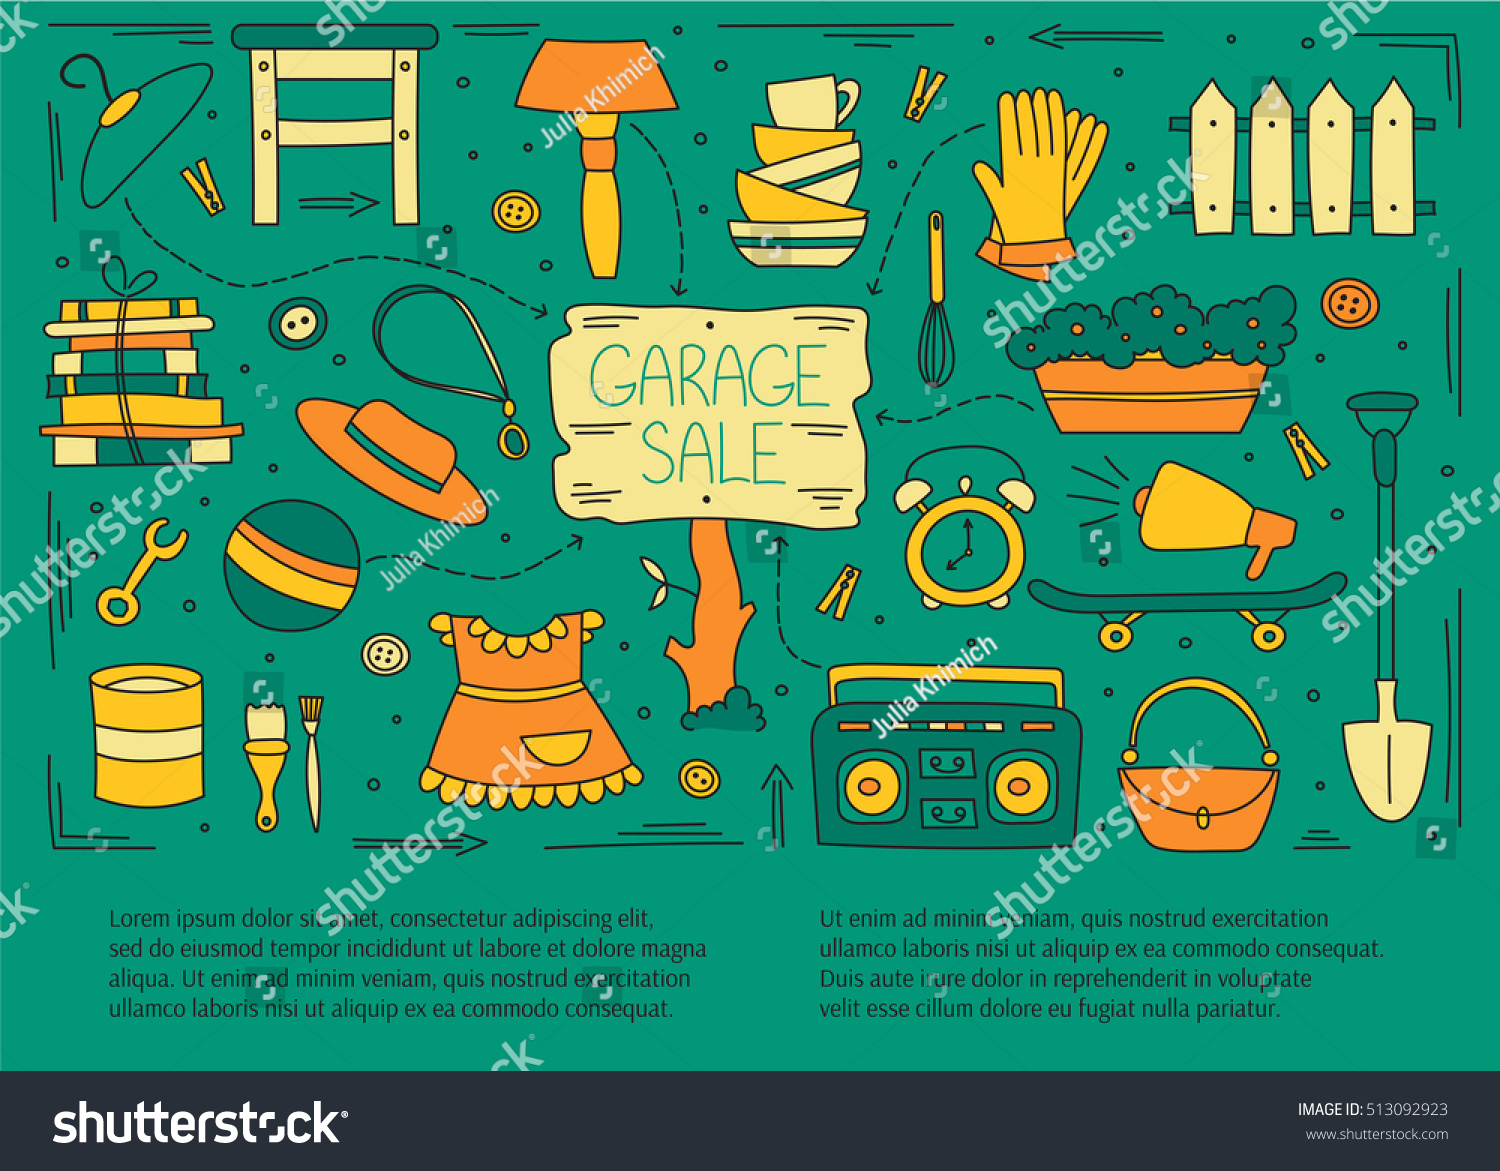 Rummage Sale Template from image.shutterstock.com